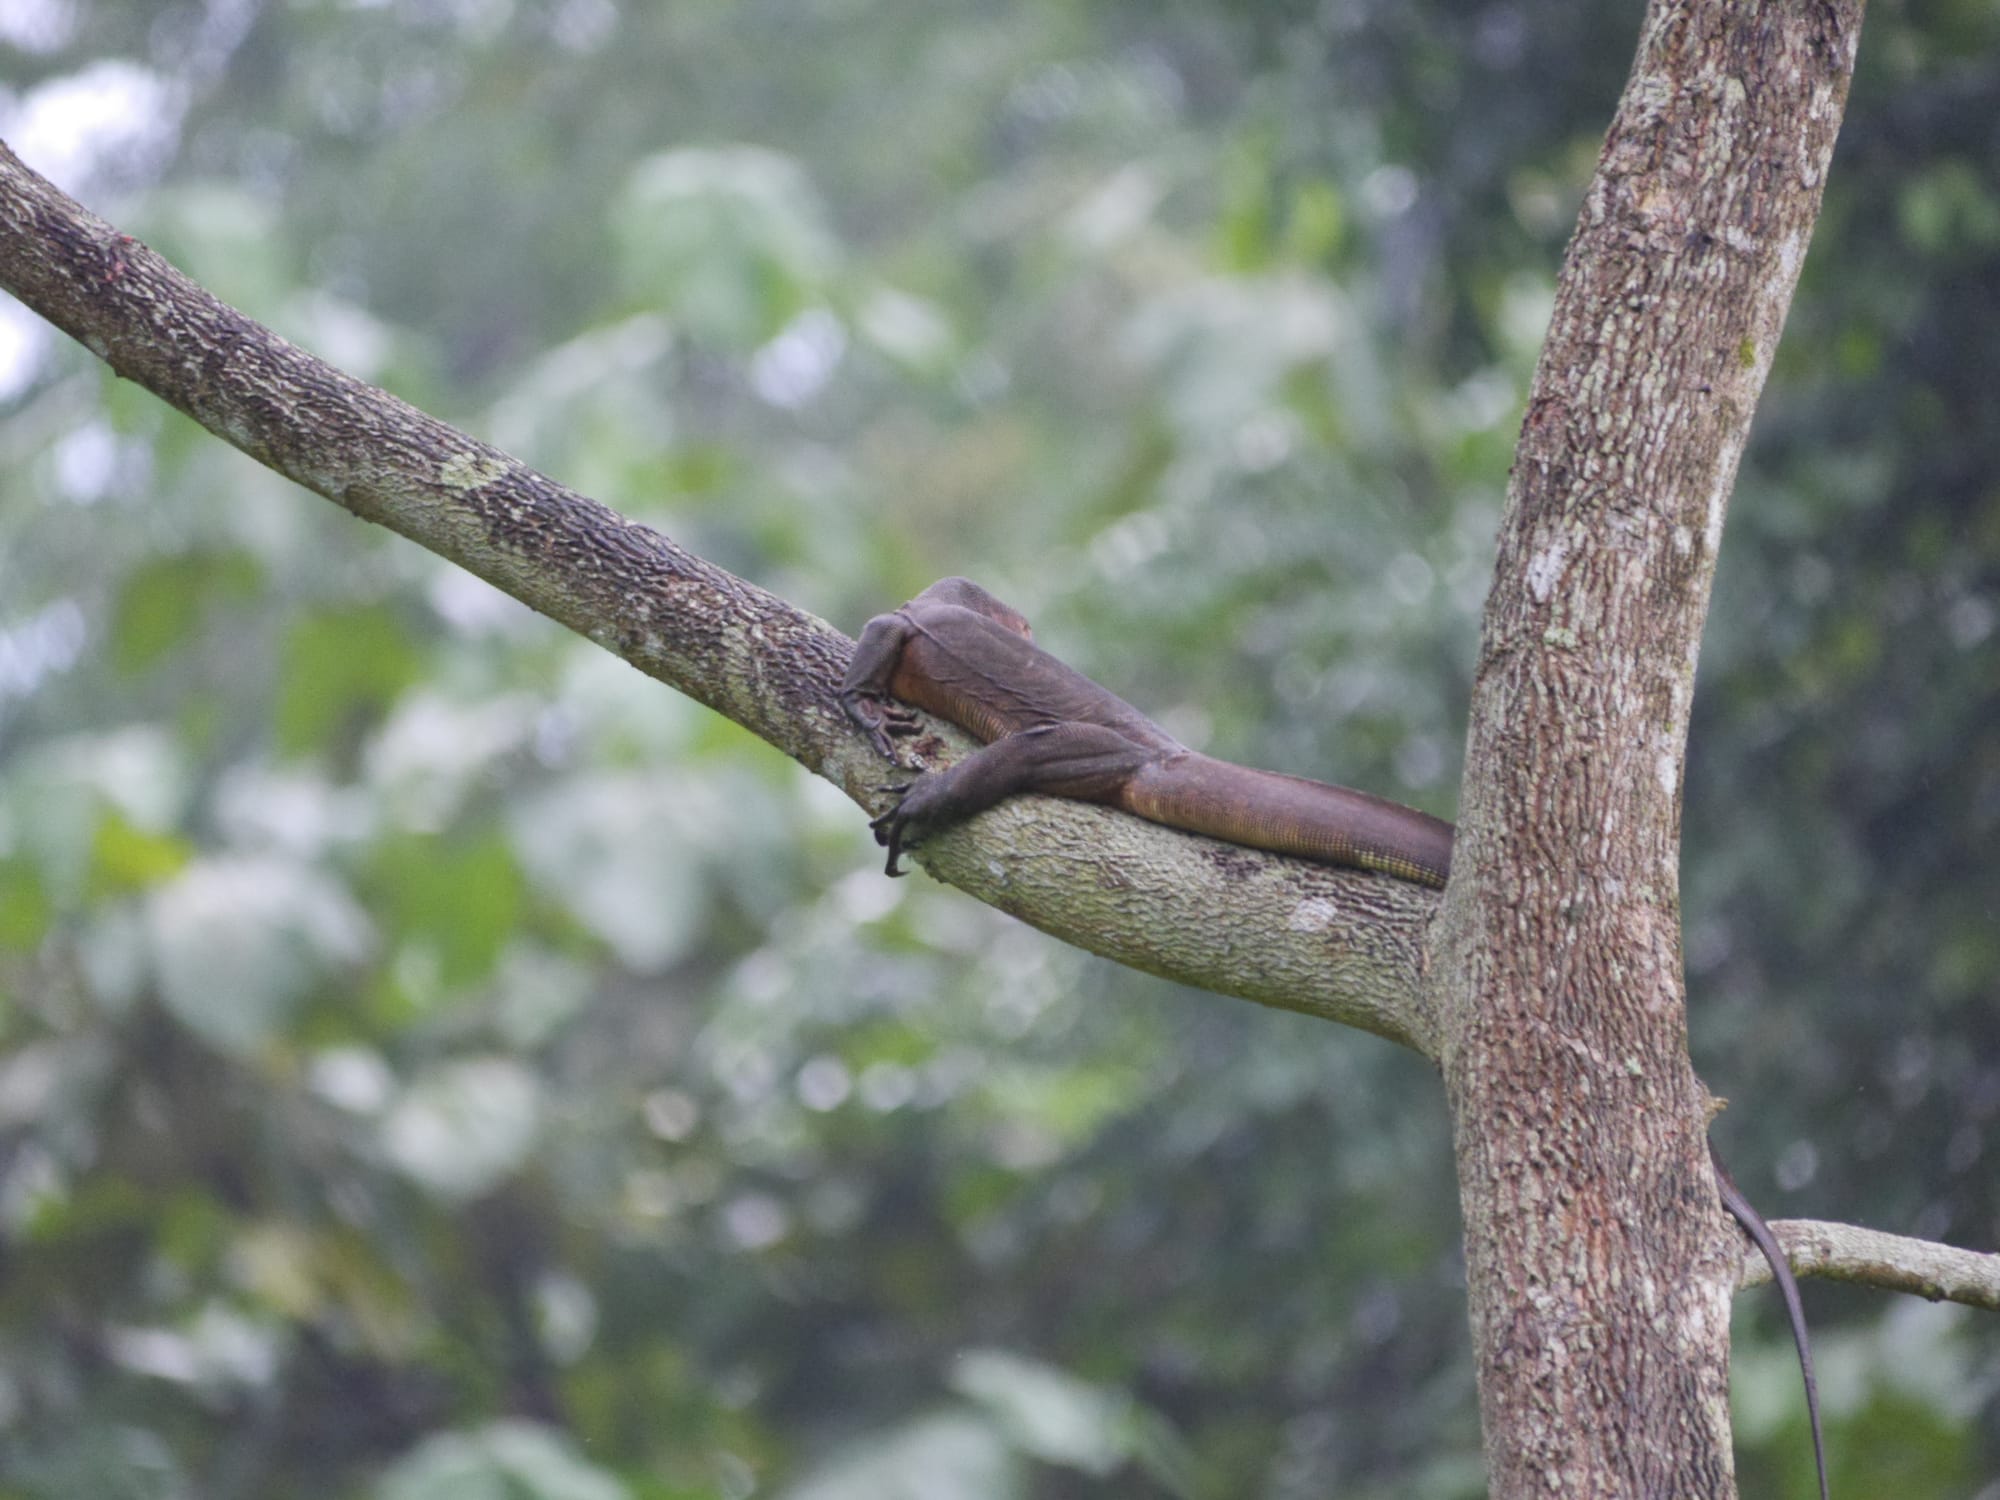 Photo by Author — a lizard in a tree — Admiralty Park, Woodlands, Singapore